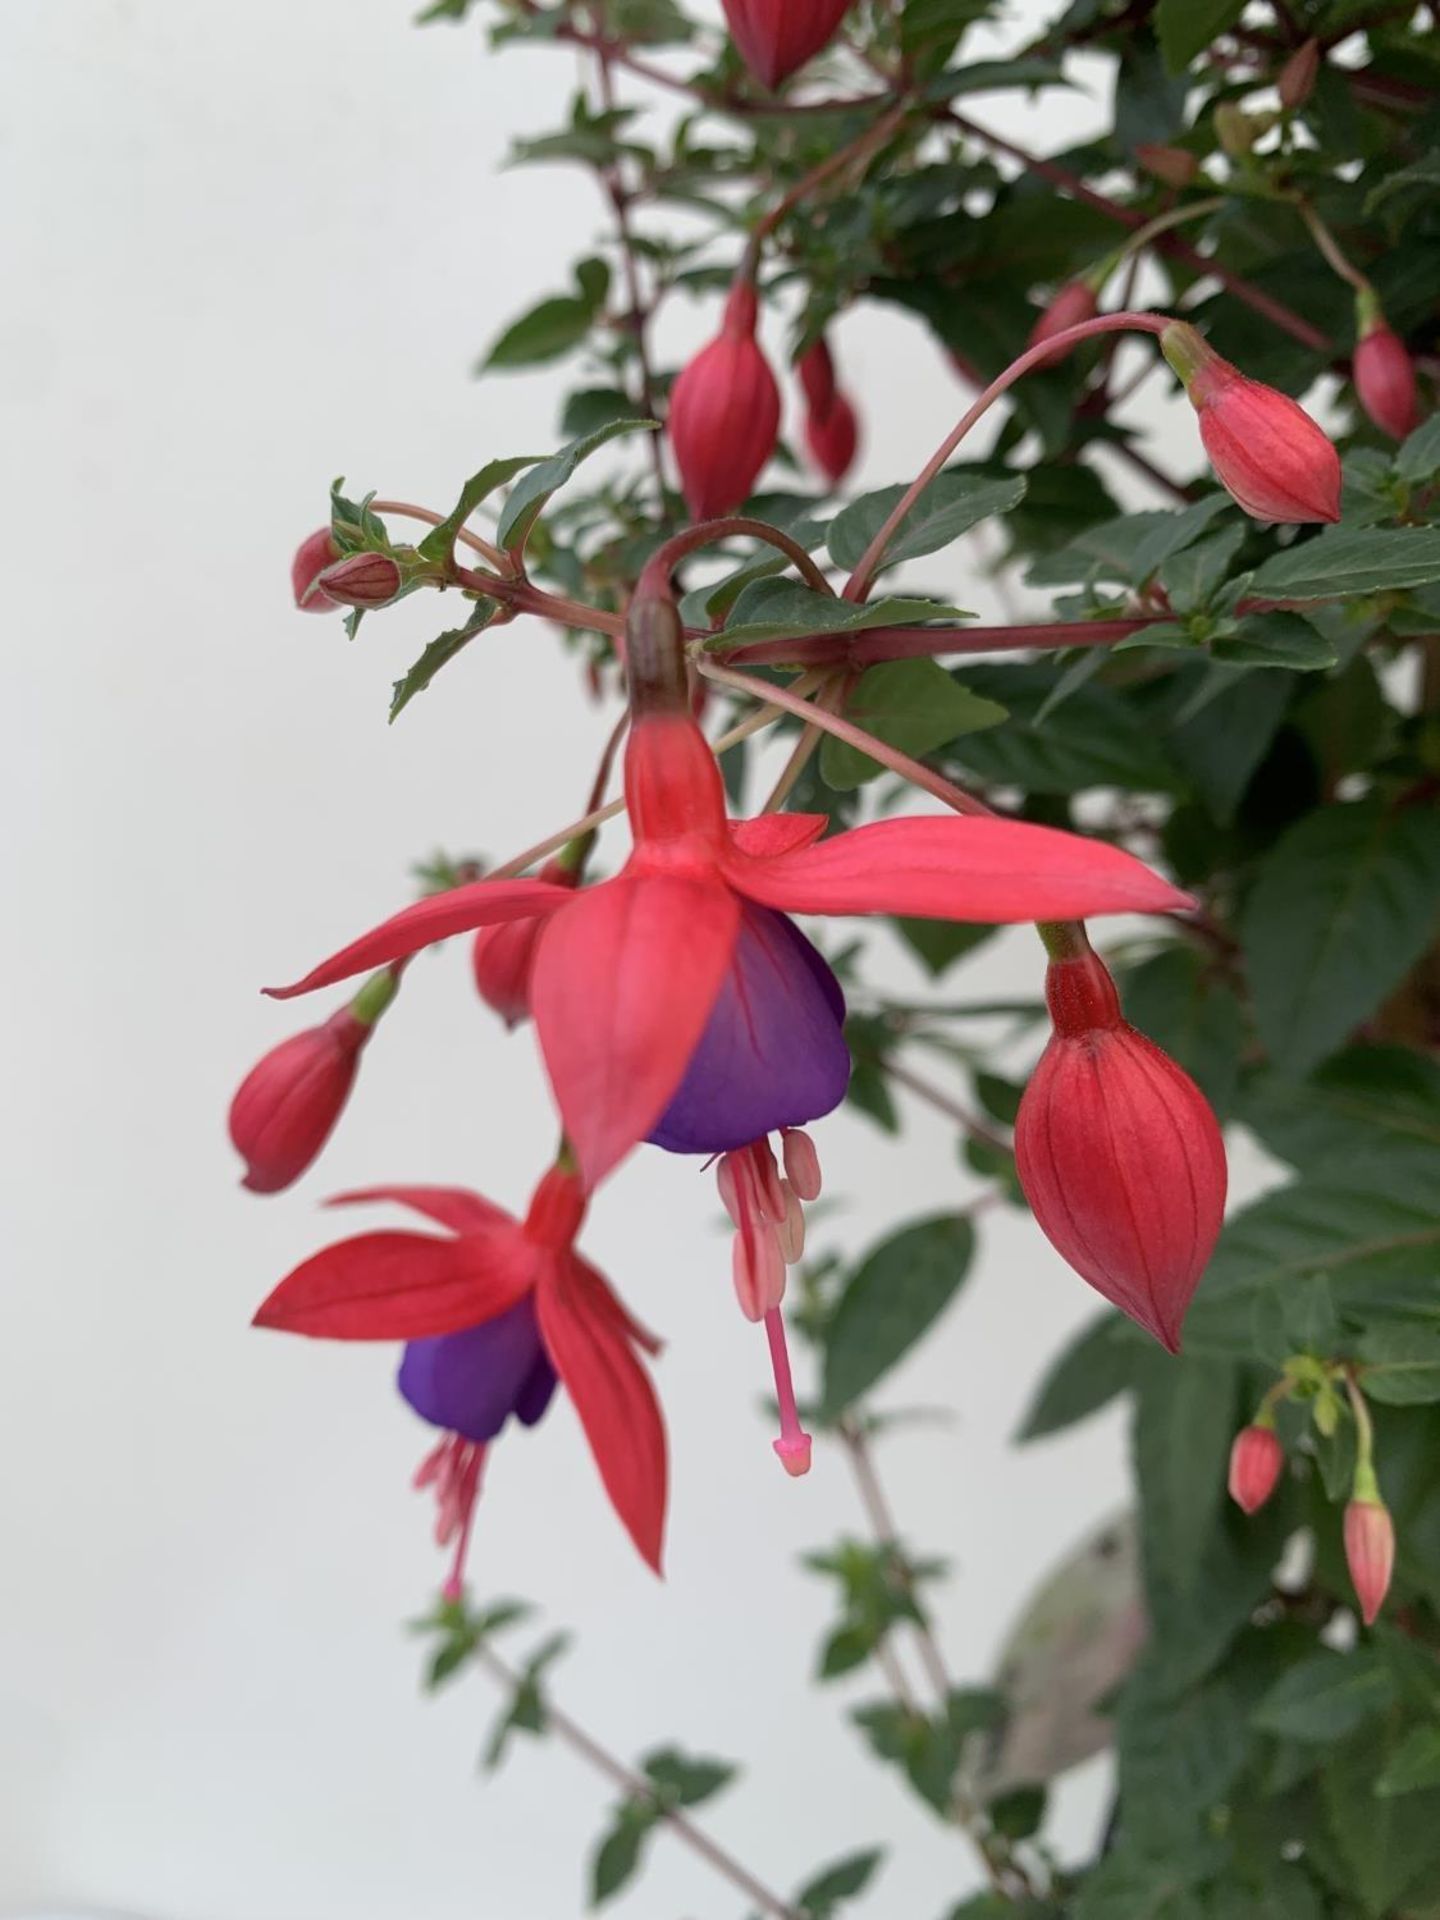 TWO BELLA STANDARD RED/WHITE AND RED/PURPLE FUCHSIA IN A 3 LTR POTS 70CM -80CM TALL TO BE SOLD FOR - Image 4 of 5